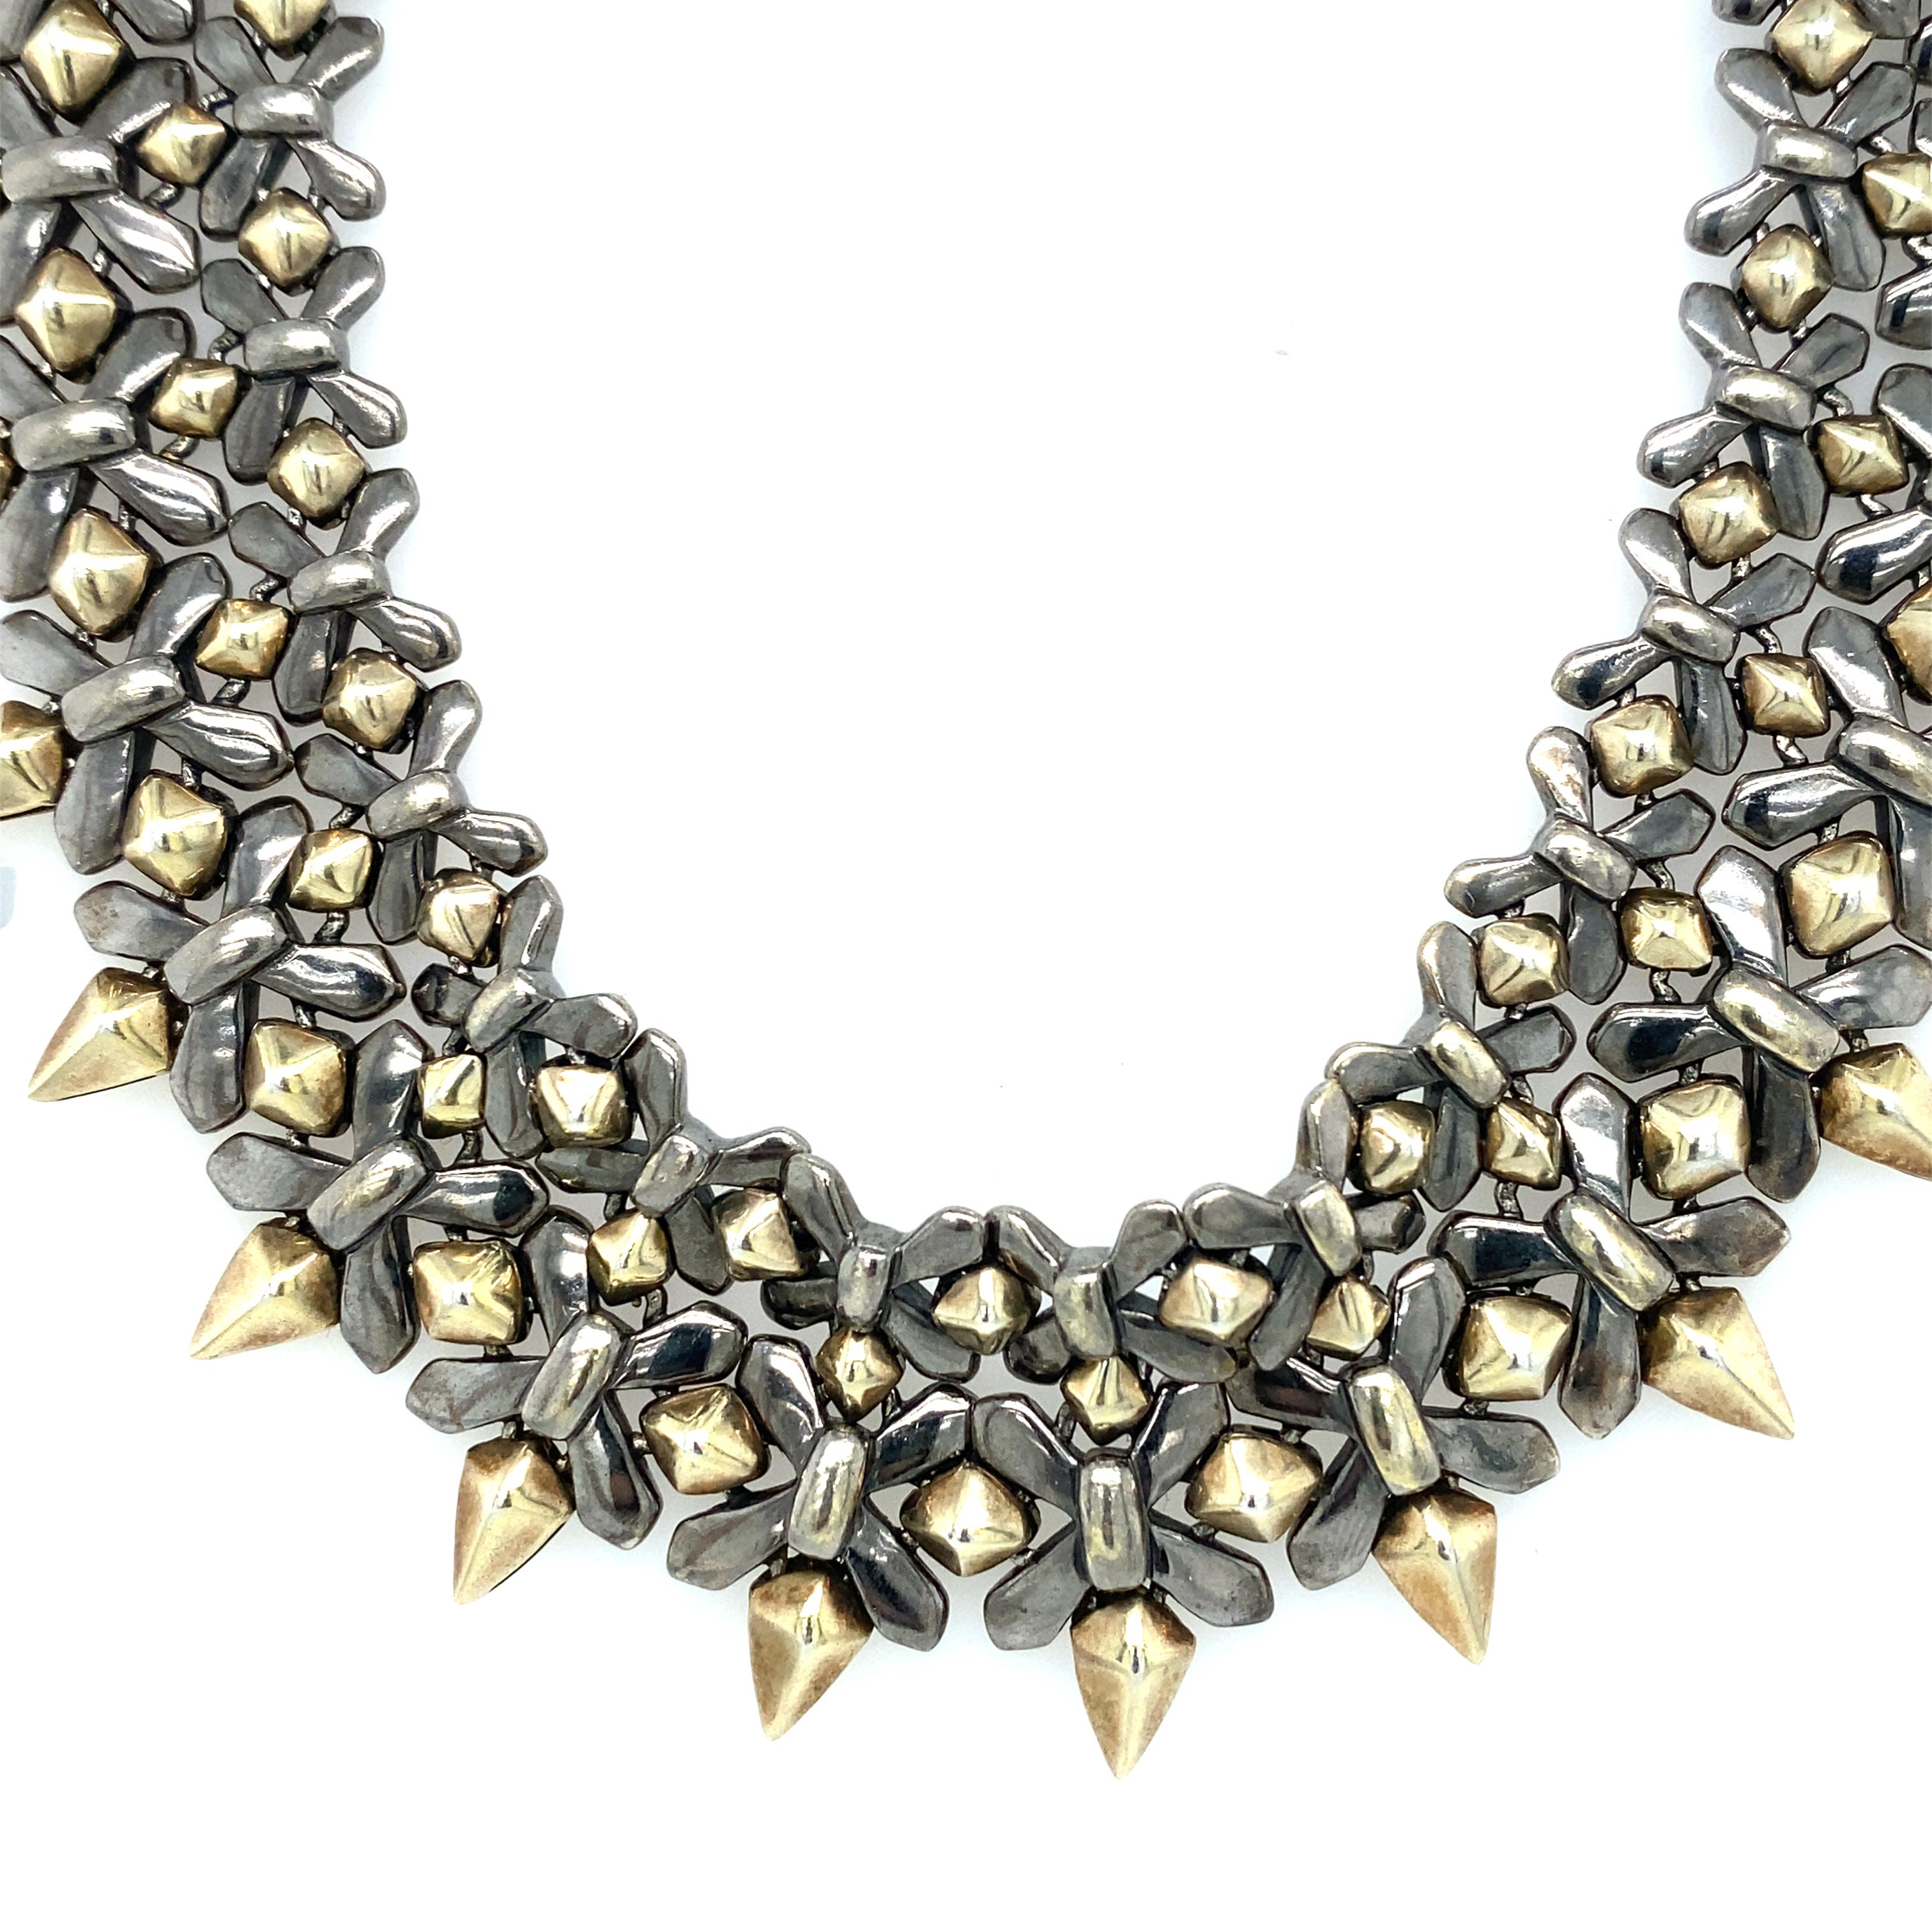 Item Details: This collar necklace by Stephen Webster is part of the designer's Superstud collection. It features a woven stud design, making this choker necklace a flexible and versatile statement piece. The studded dangles are toned in gold. This